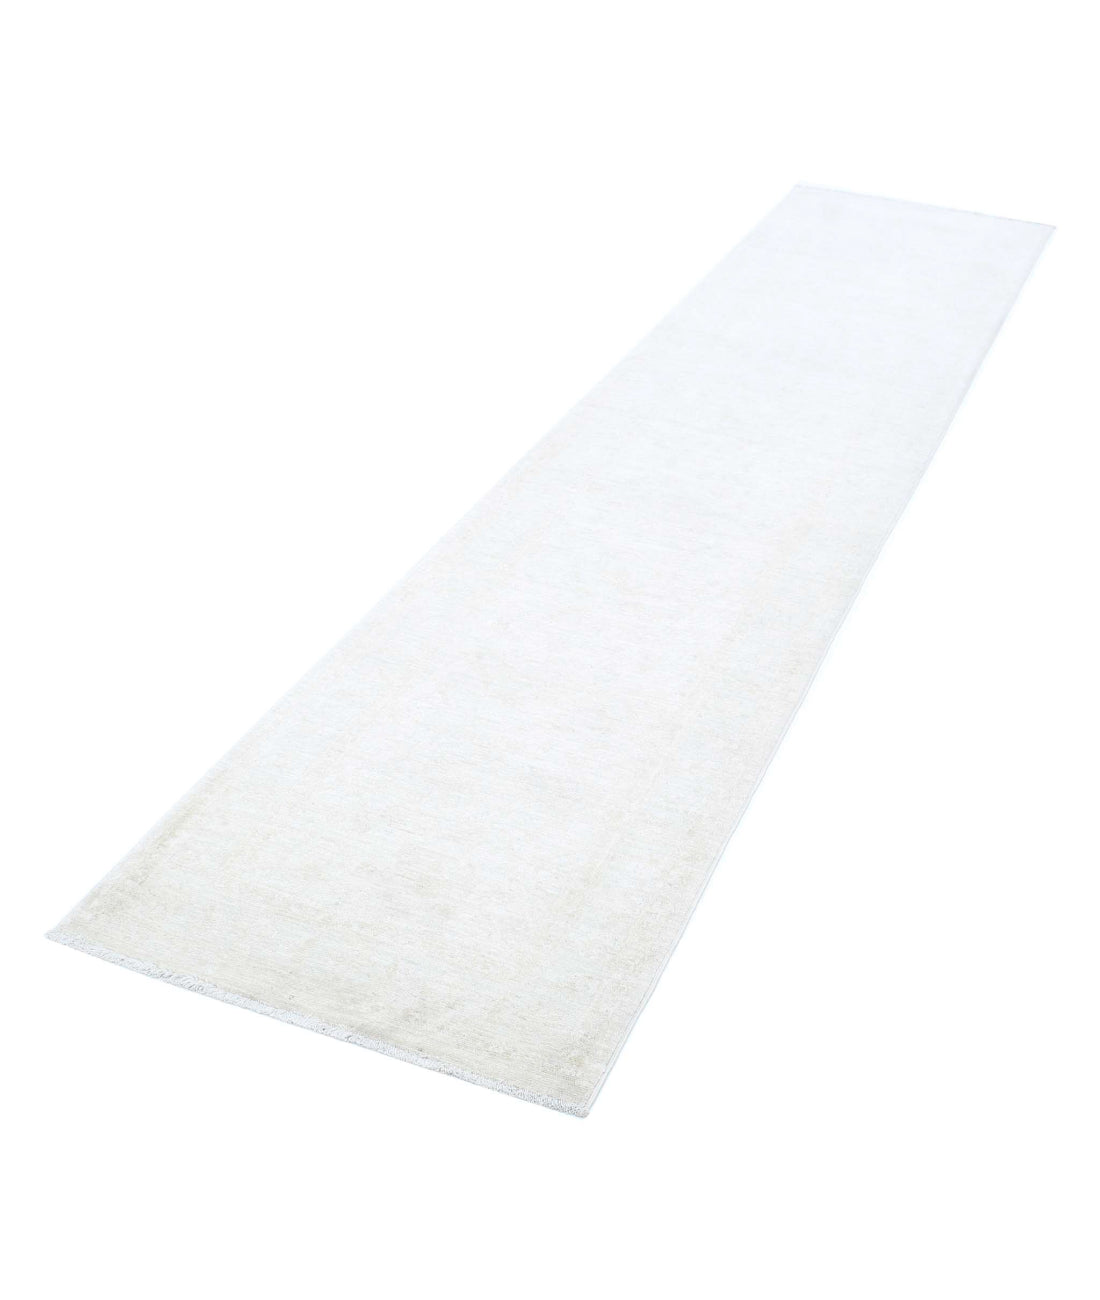 Serenity 2'5'' X 10'0'' Hand-Knotted Wool Rug 2'5'' x 10'0'' (73 X 300) / Ivory / Ivory